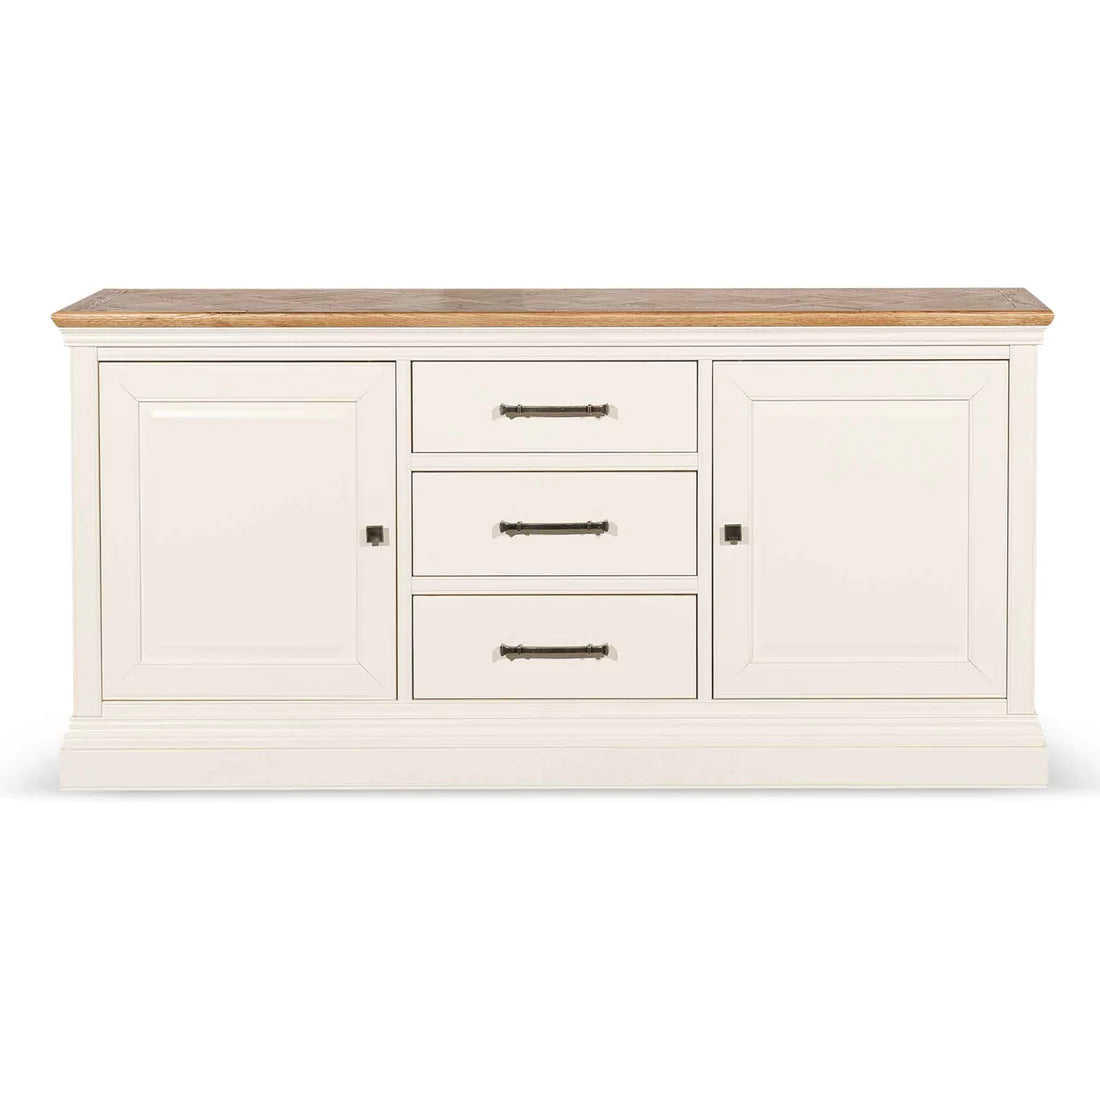 White Sideboard with Parquetry Design top